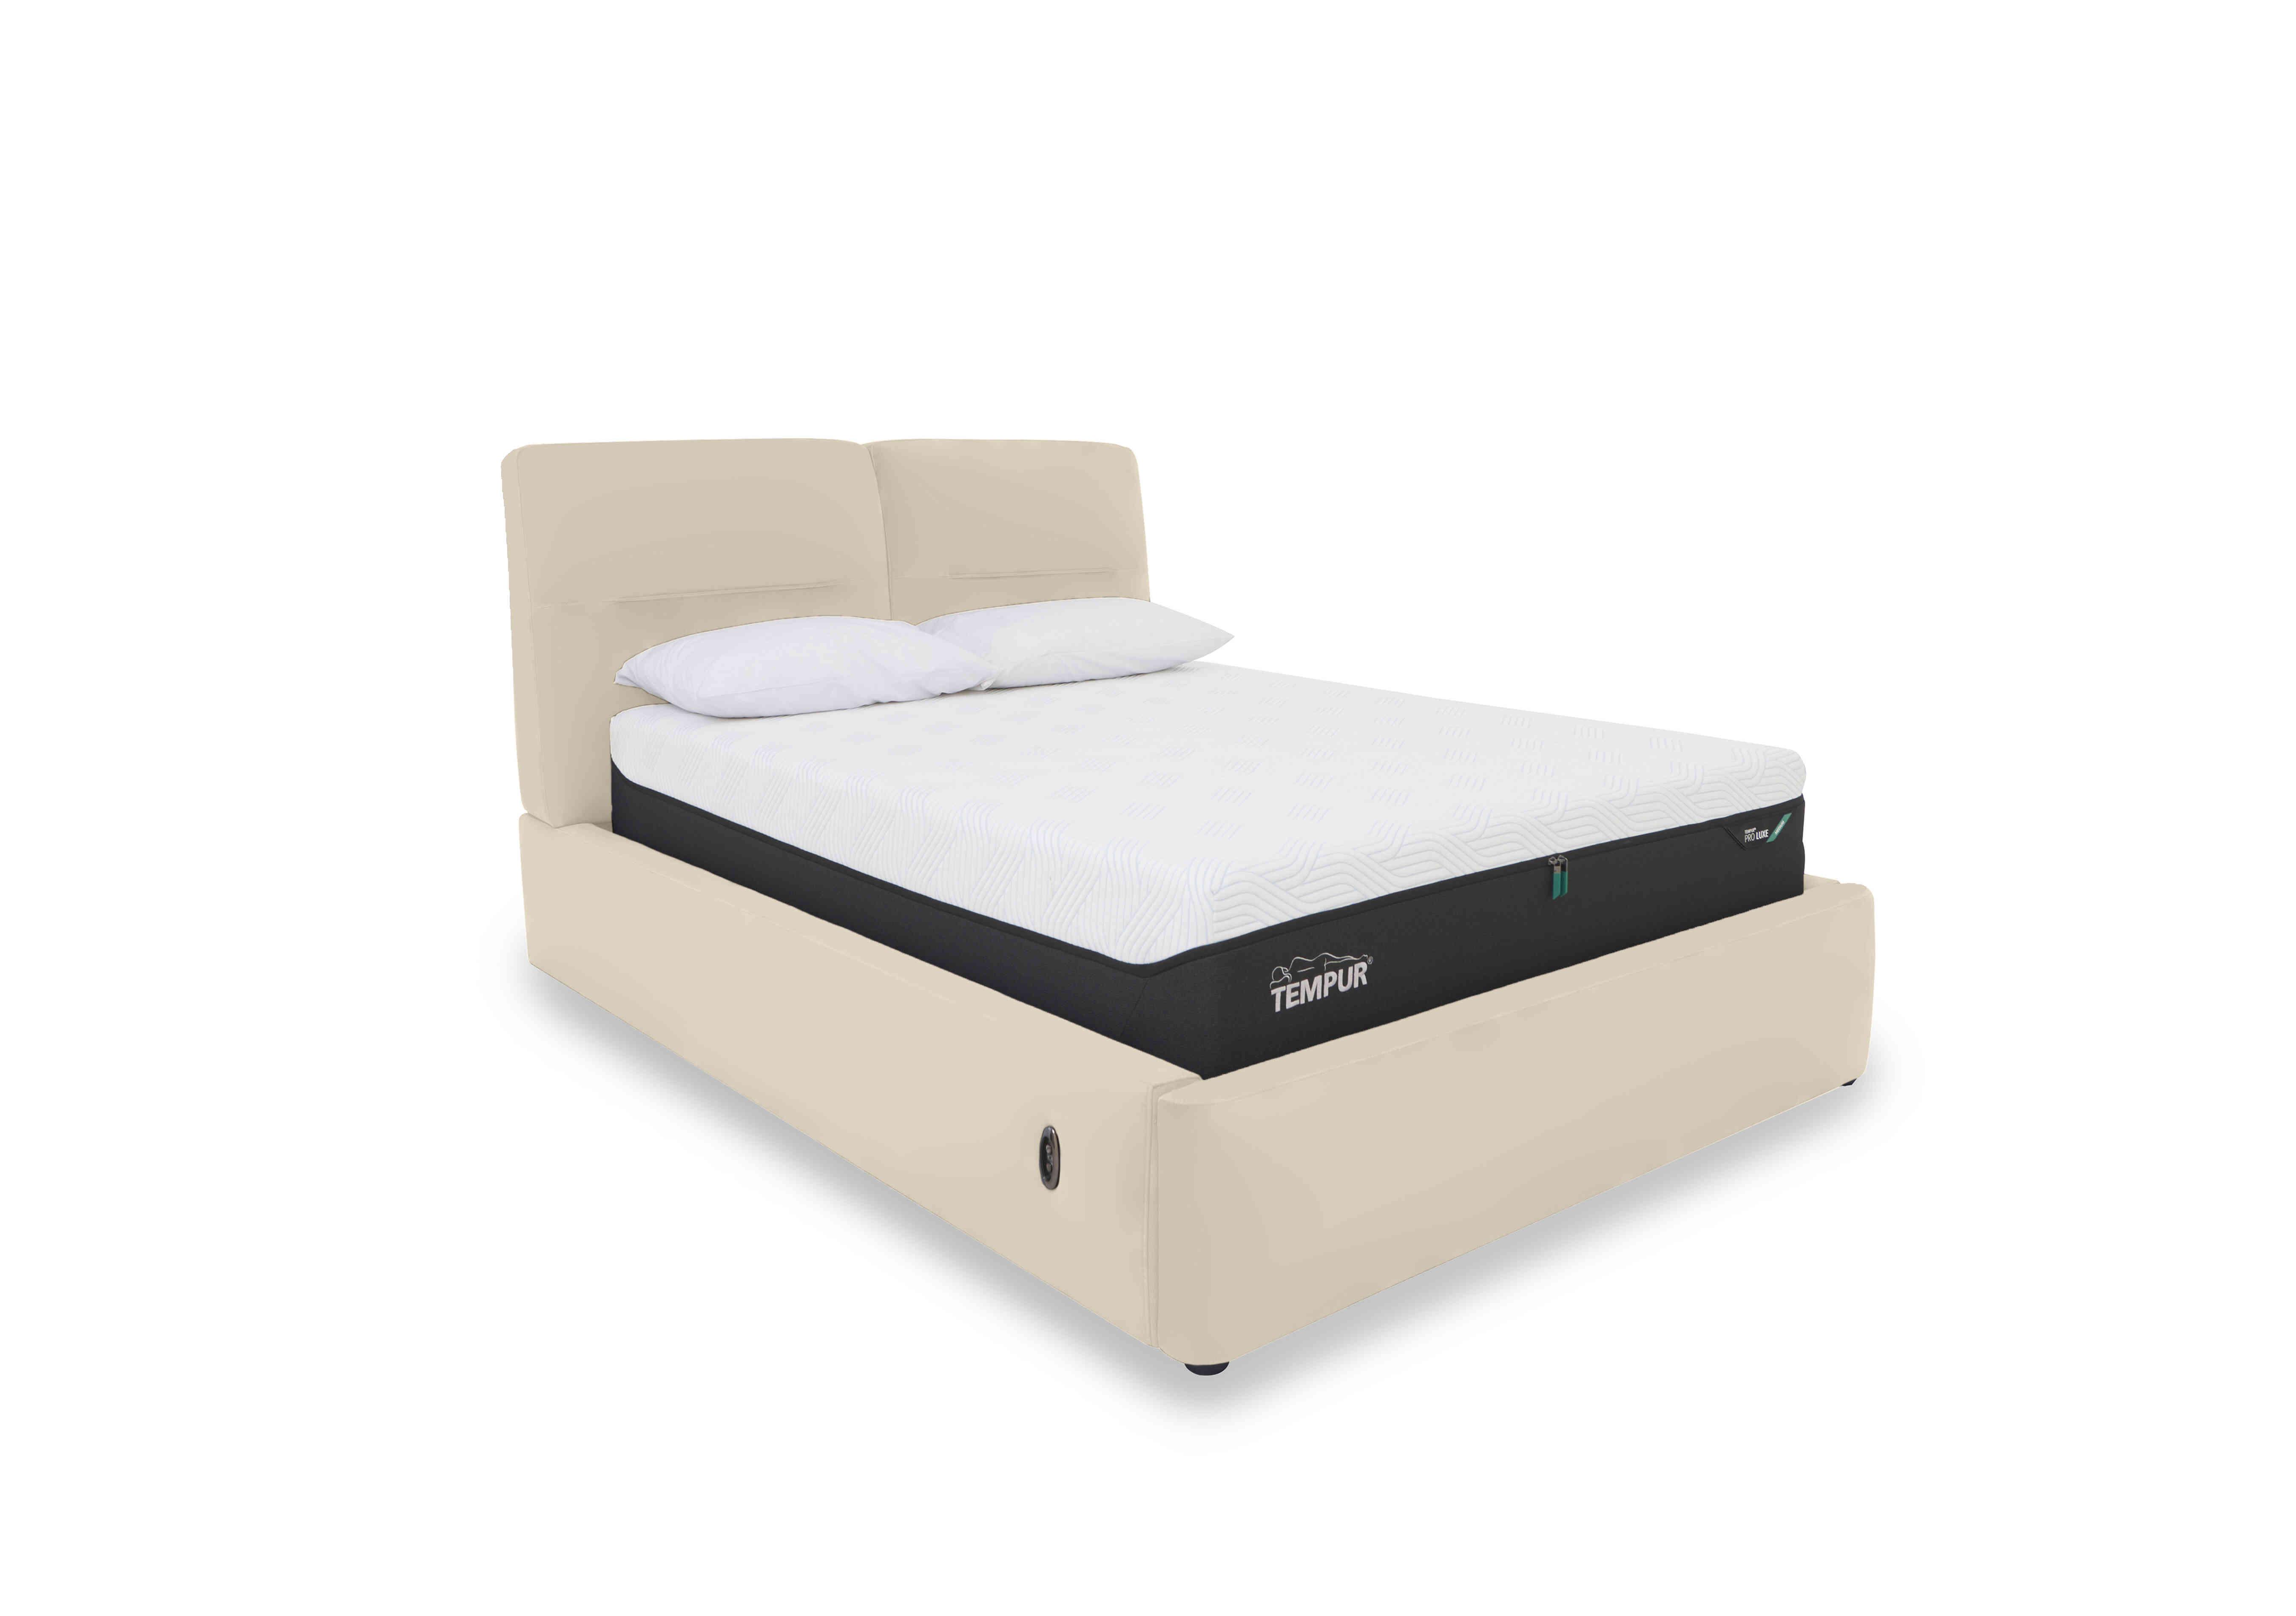 Stark Leather Electric Ottoman Bed Frame in Bv-862c Bisque on Furniture Village